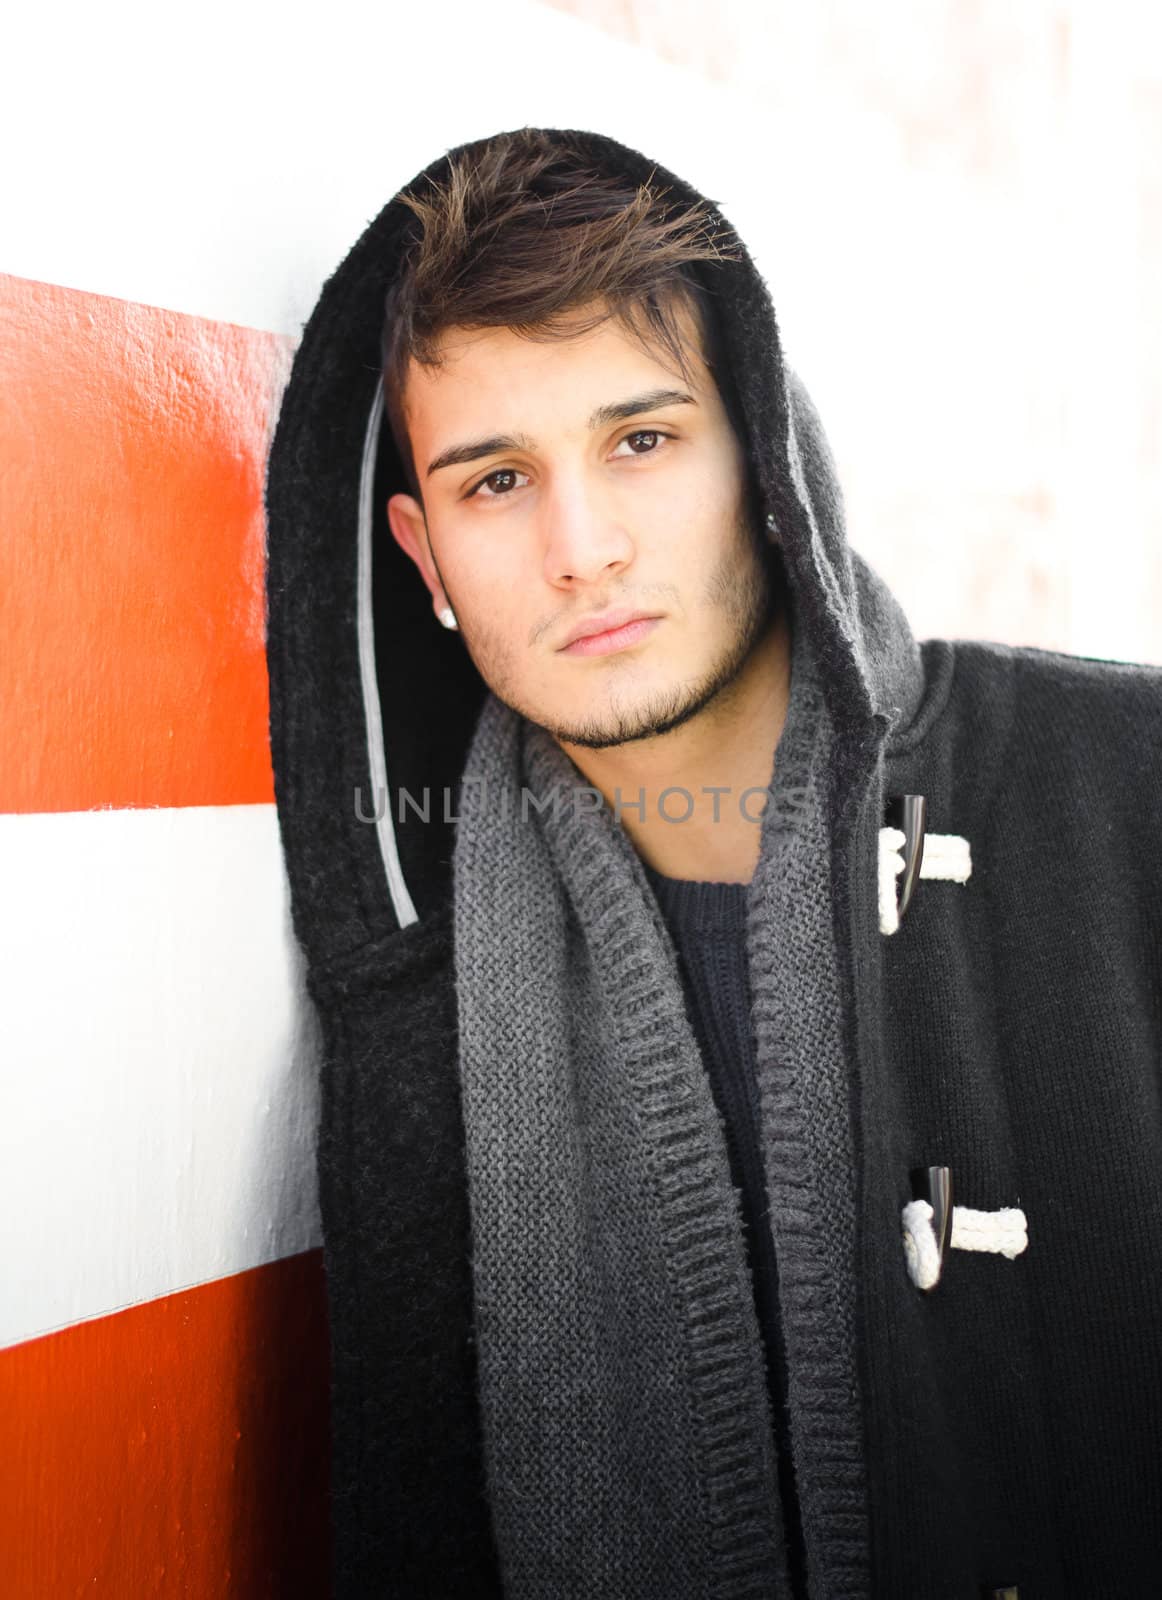 Handsome young man in hoodie against white and orange striped wall by artofphoto